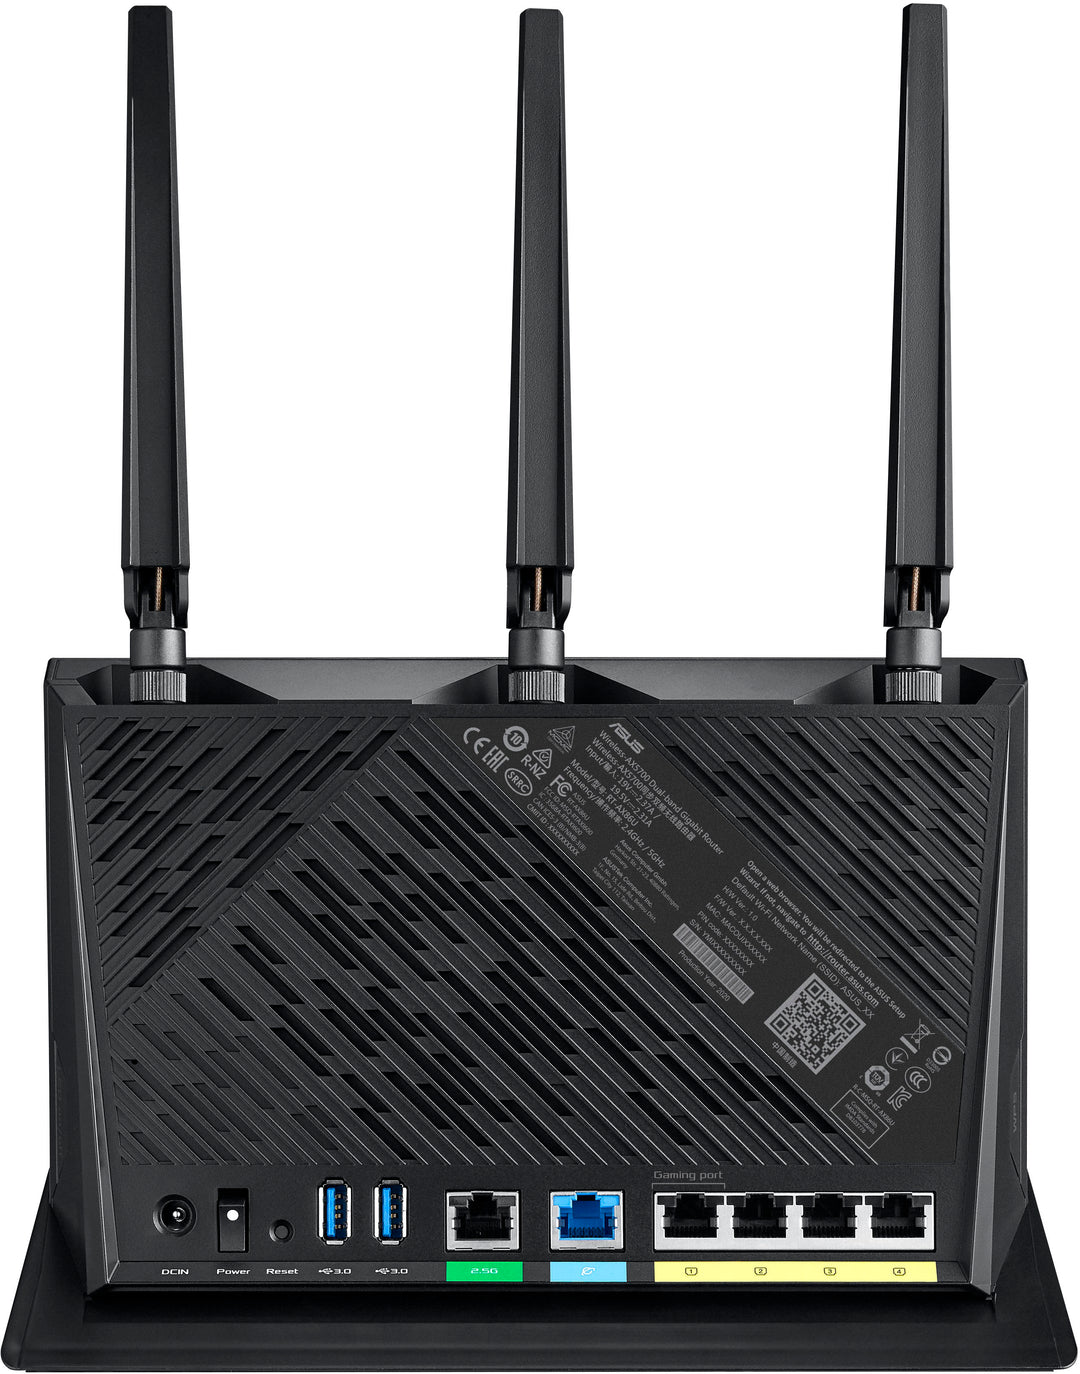 ASUS - AX5700 Dual-Band Wi-Fi 6 Router_3